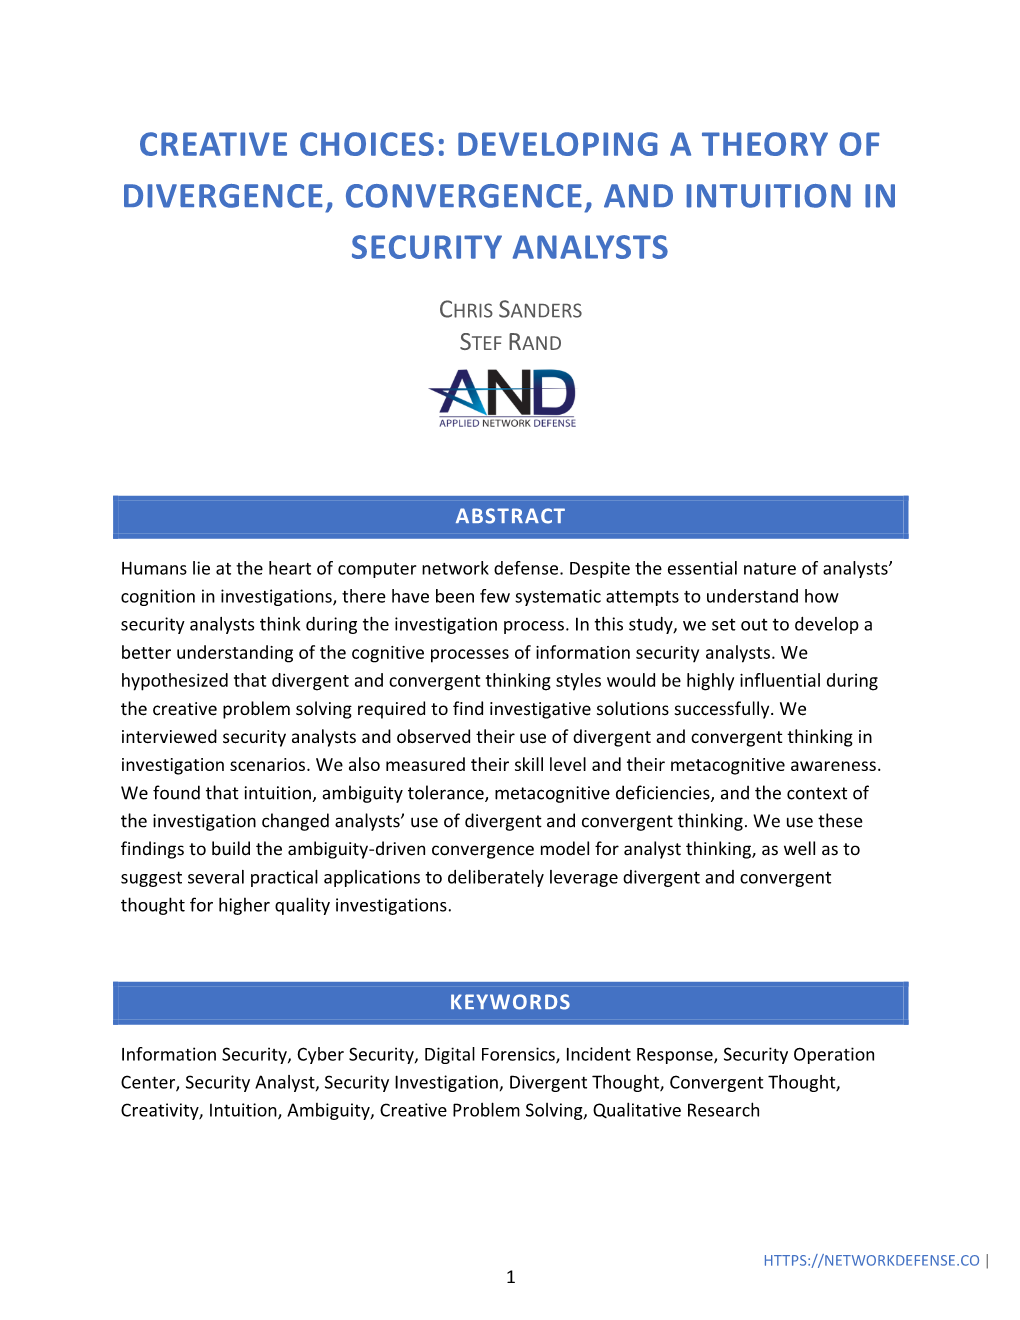 Developing a Theory of Divergence, Convergence, and Intuition in Security Analysts